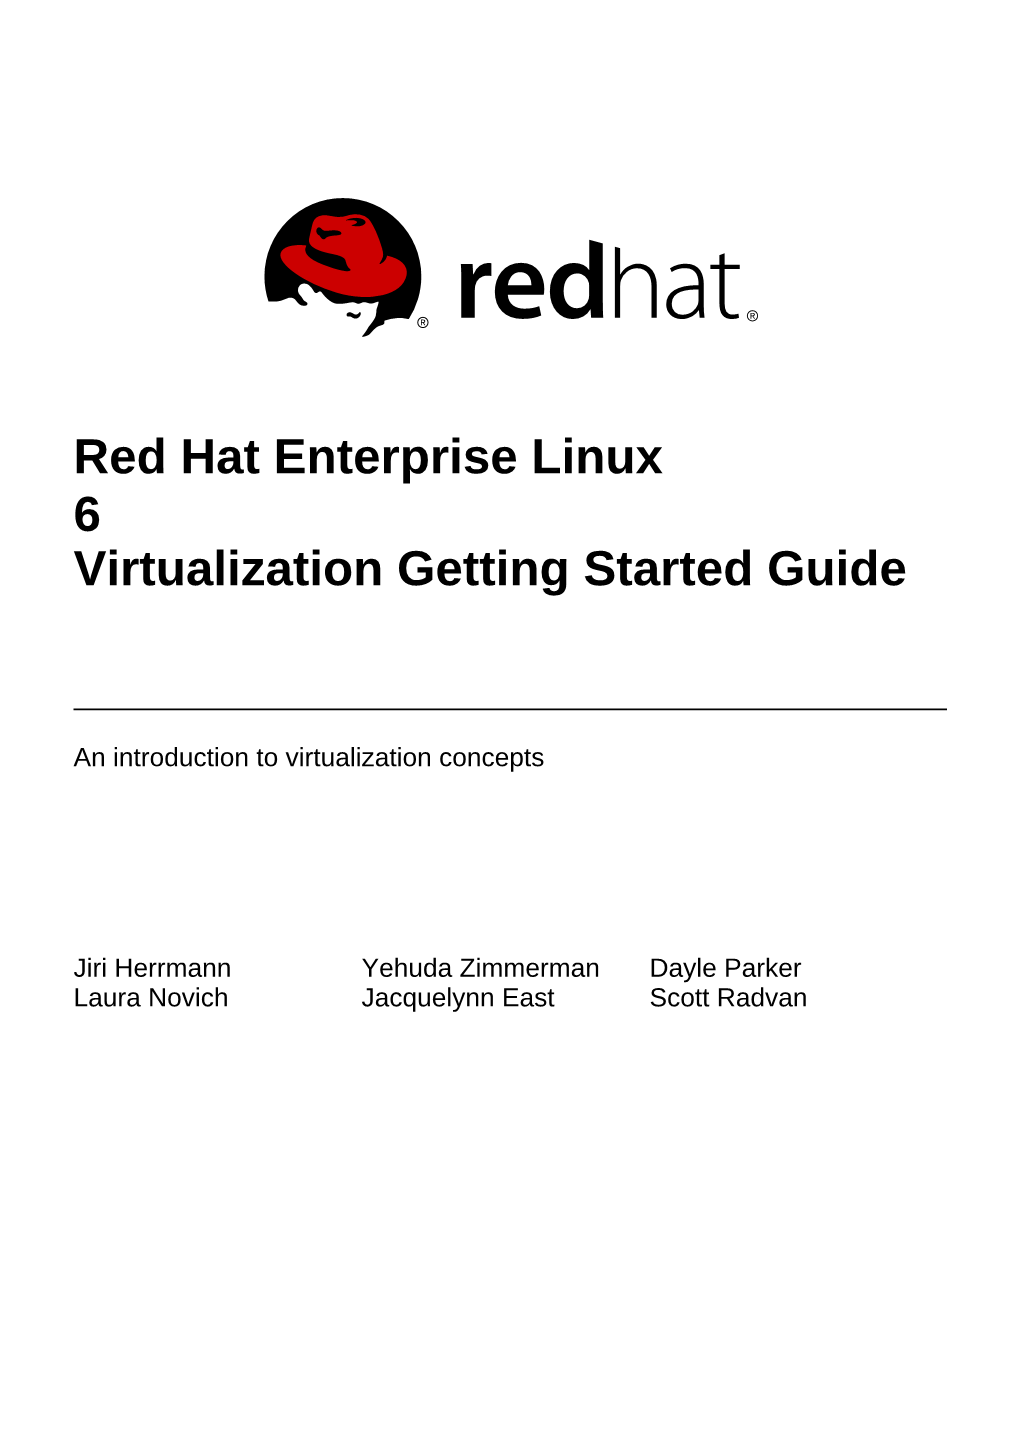 Red Hat Enterprise Linux 6 Virtualization Getting Started Guide